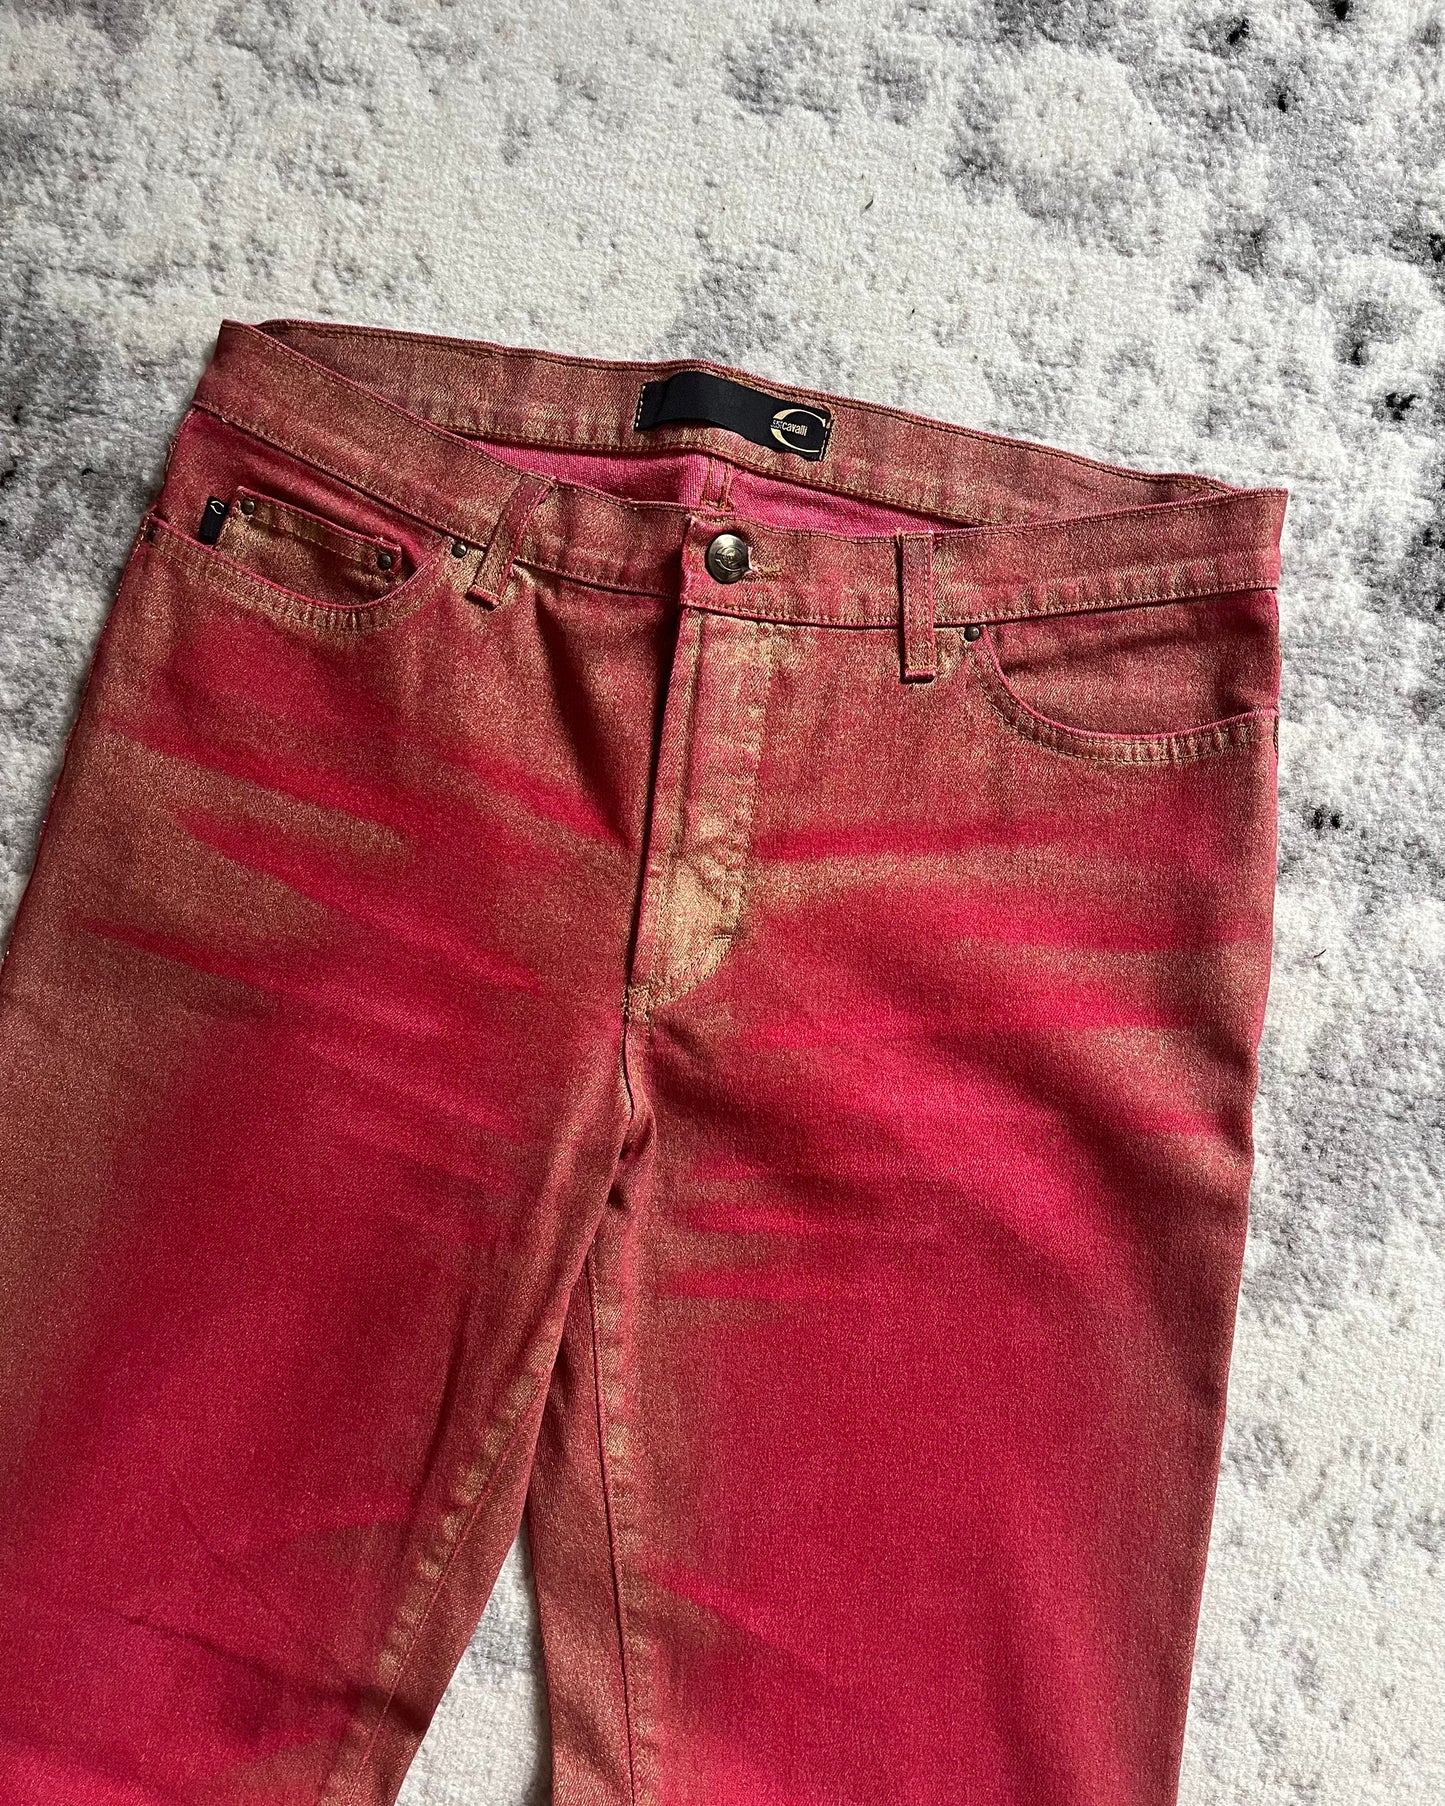 00s Just Cavalli Vibrant Red Electric Pants (M)